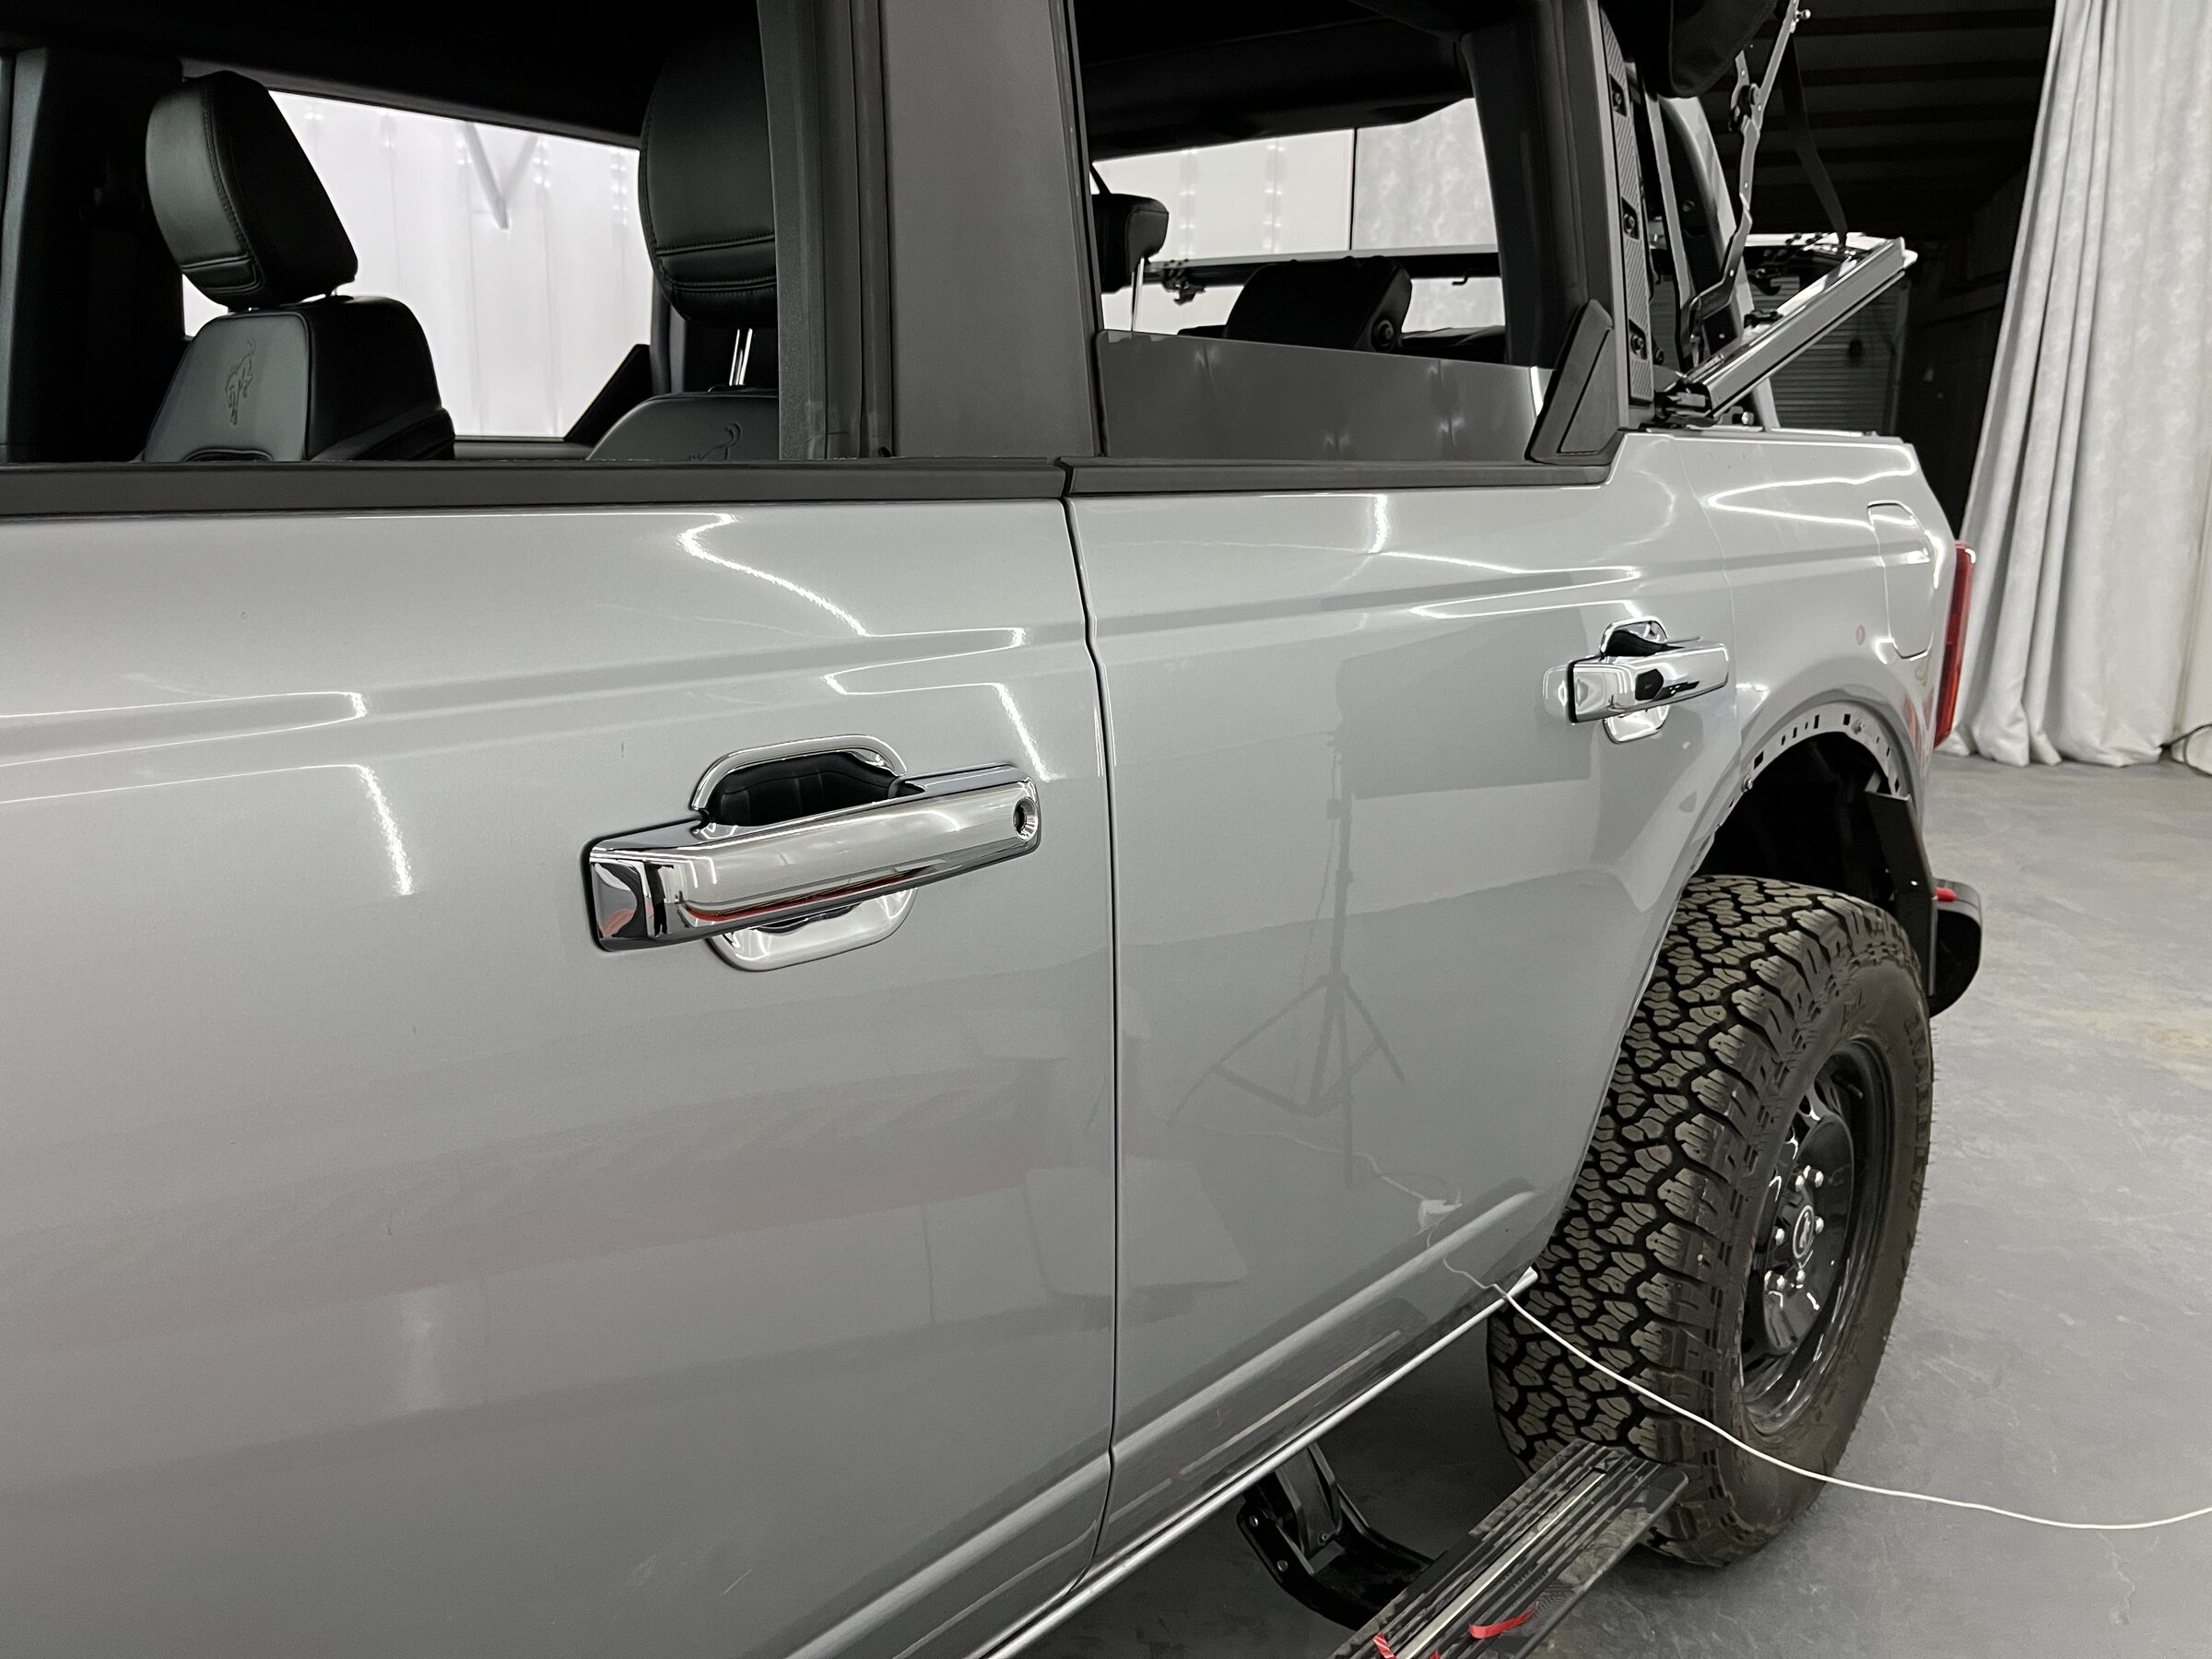 Ford Bronco Mabett wants to get suggestion about gas cover modification and Door handles and key/scratch guard mirror